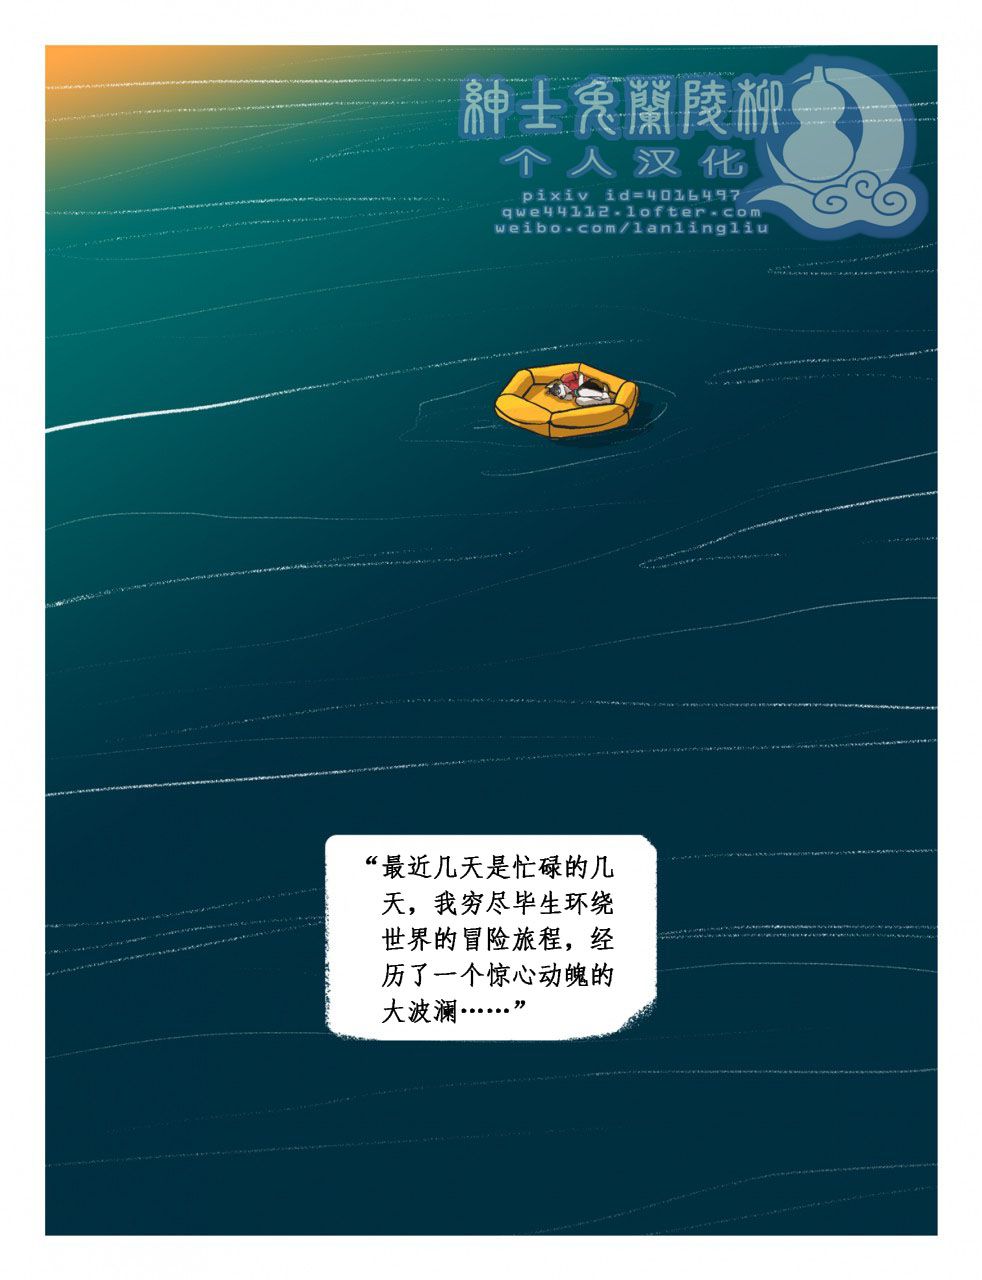 [Edesk Sisco] 失与寻 Lost and Found [Chinese] [绅士兔兰陵柳个人汉化] [Ongoing] [翻译进行中] 2